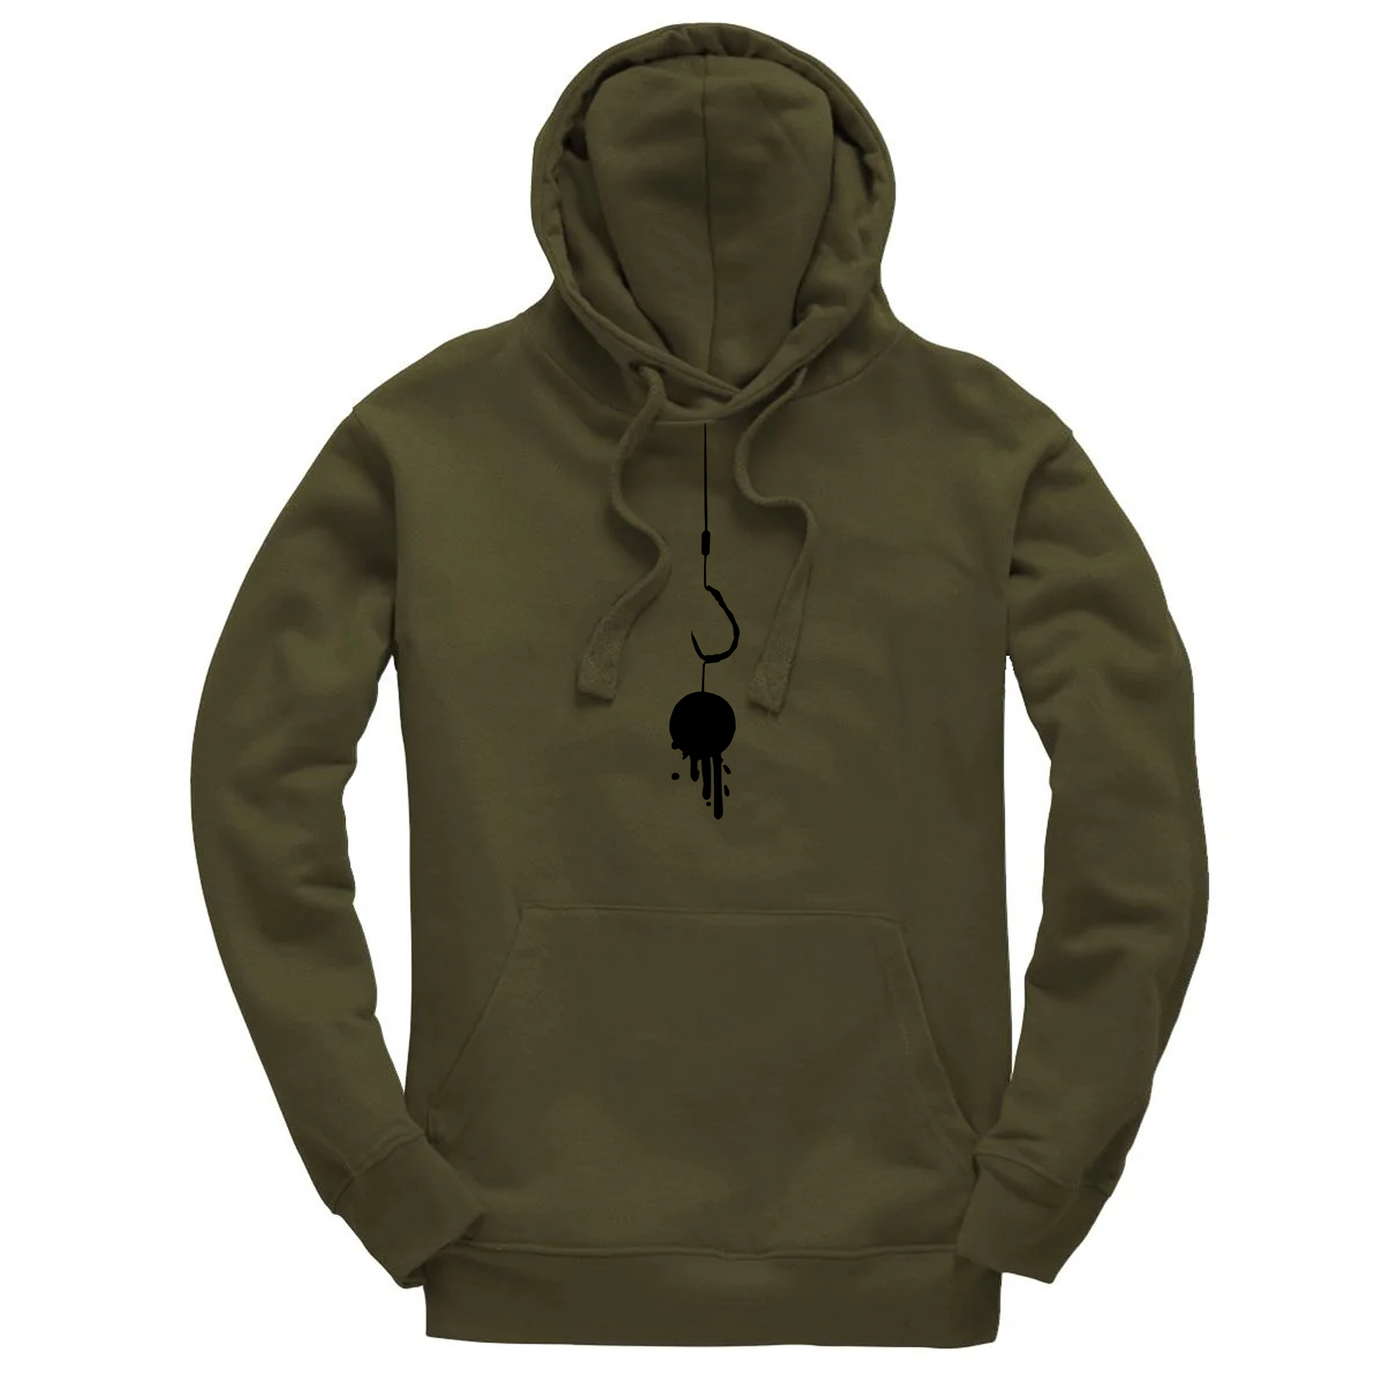 GREEN RIGGED OUT HEX STASH HOODY - XXL - BLACK FRIDAY SALE